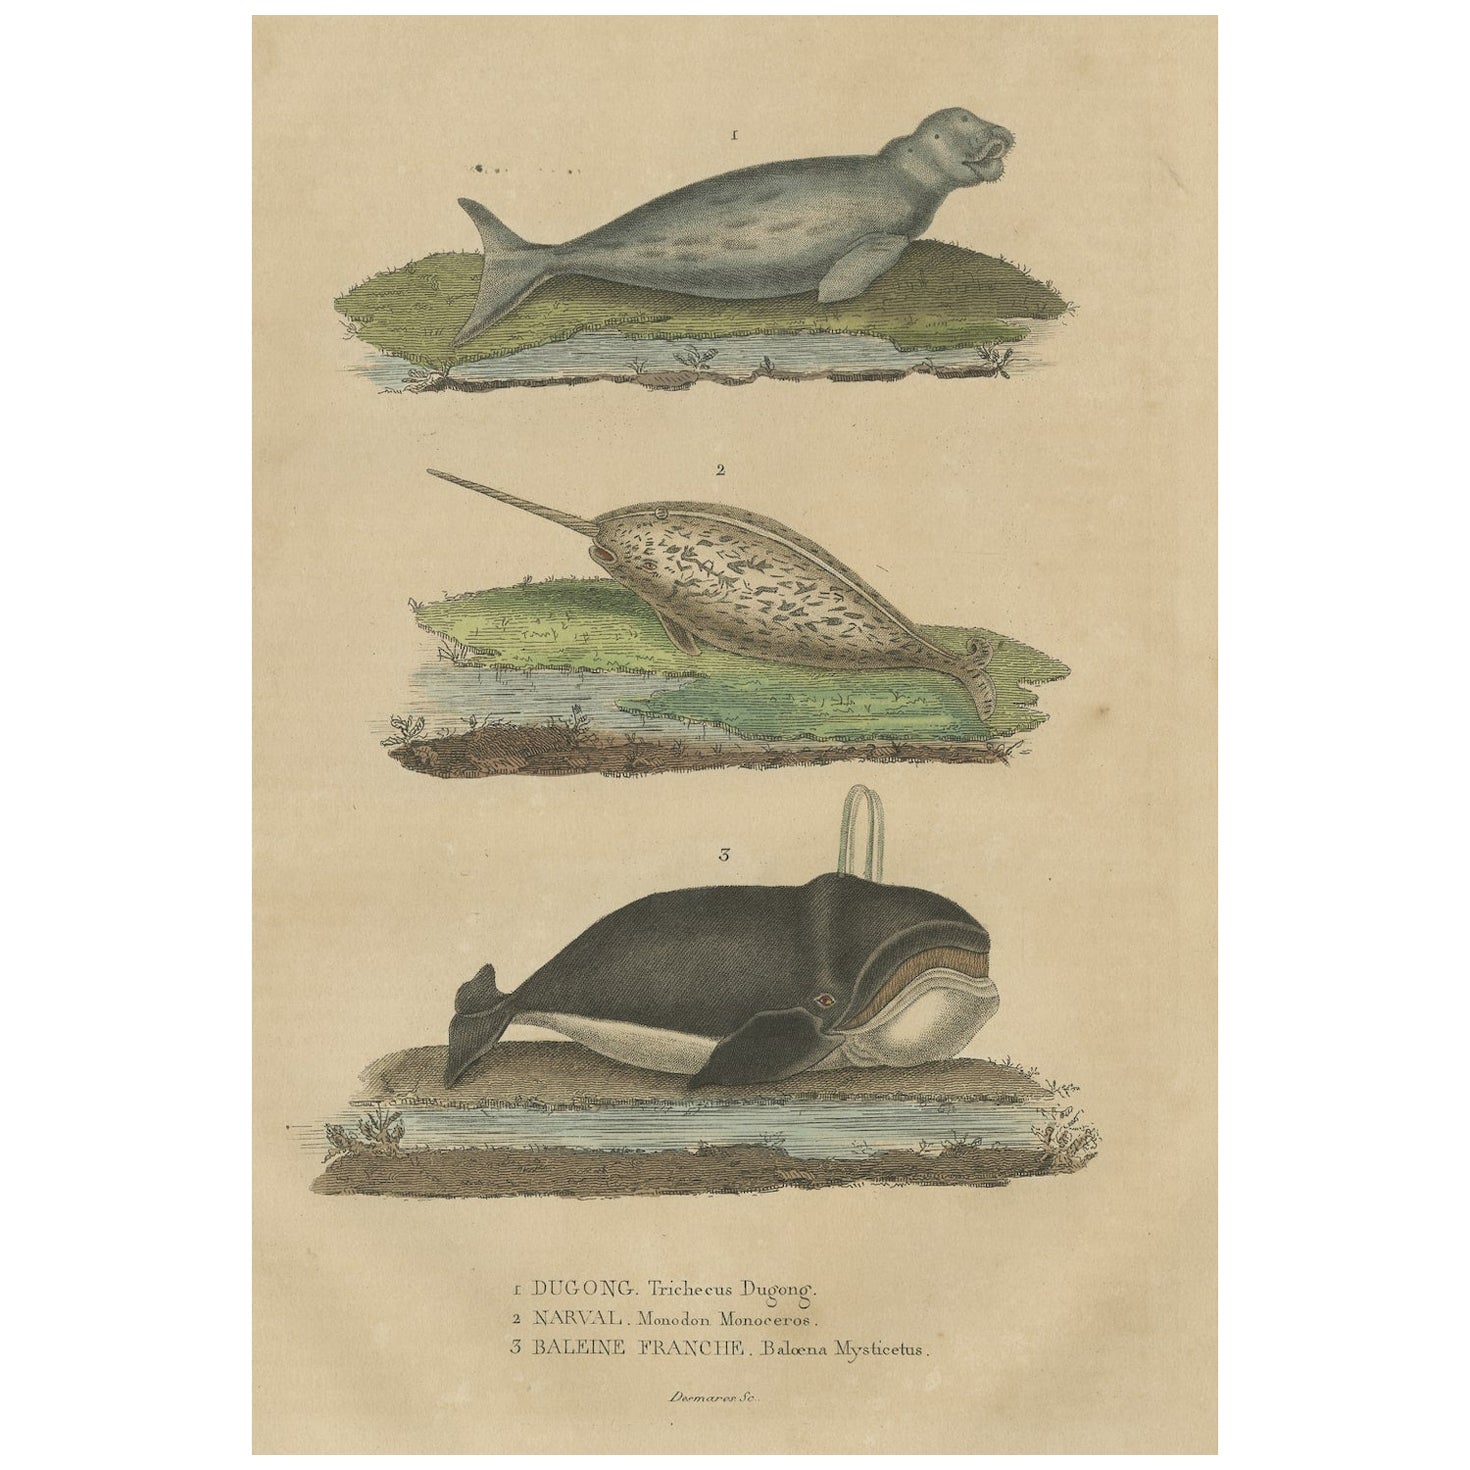 Old Hand-colored Print of a Dugong, a Narwhal and a Right Whale